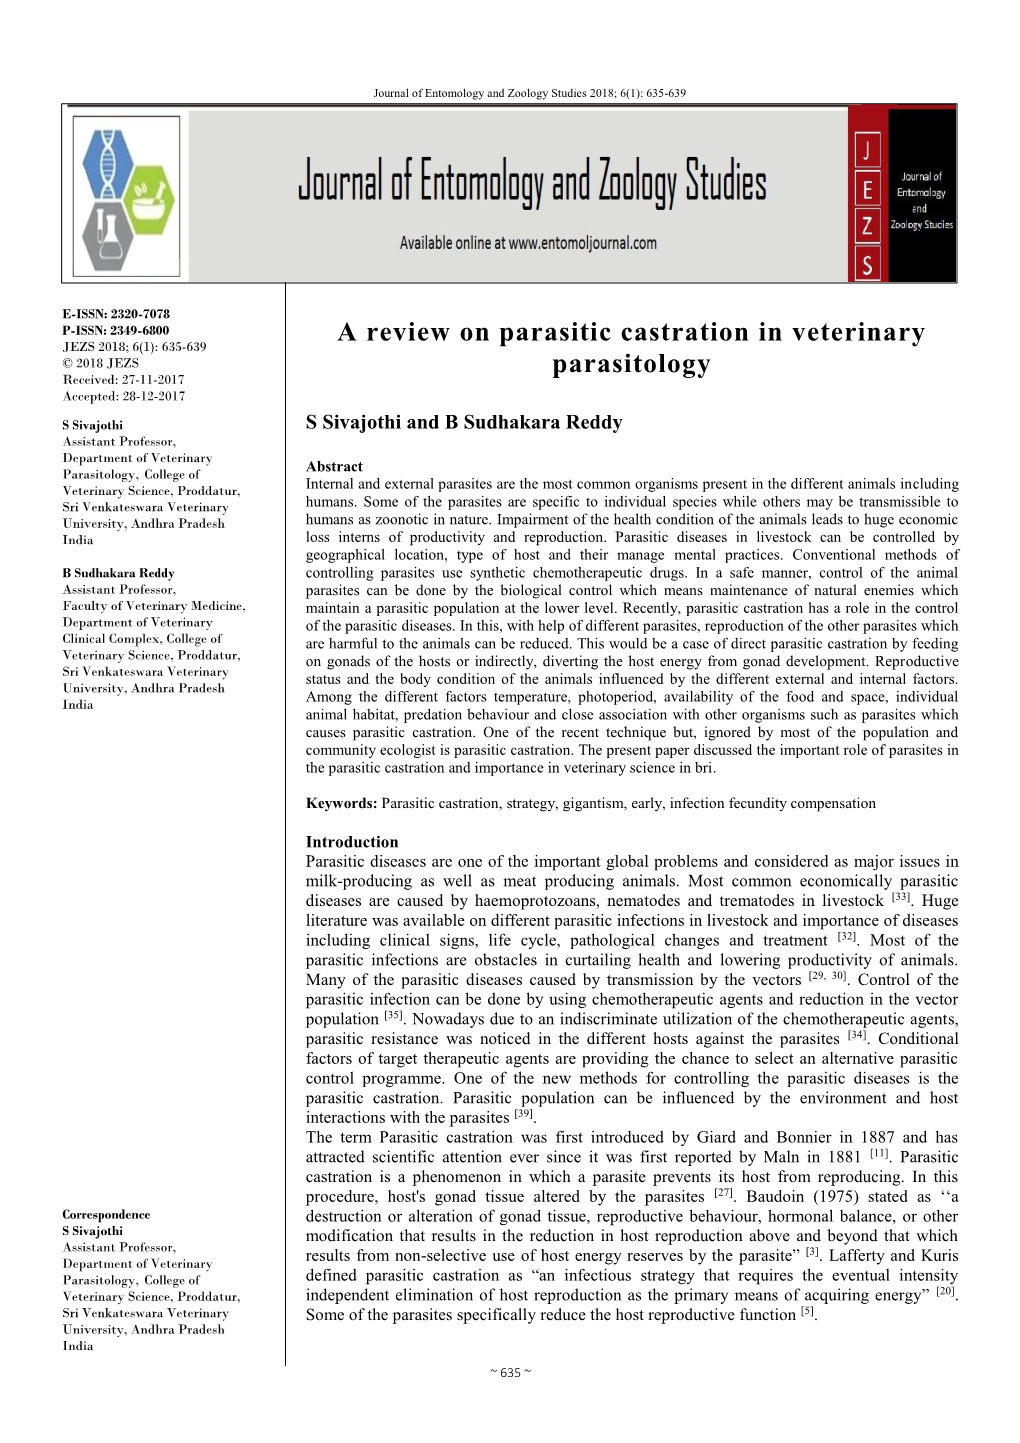 A Review on Parasitic Castration in Veterinary Parasitology